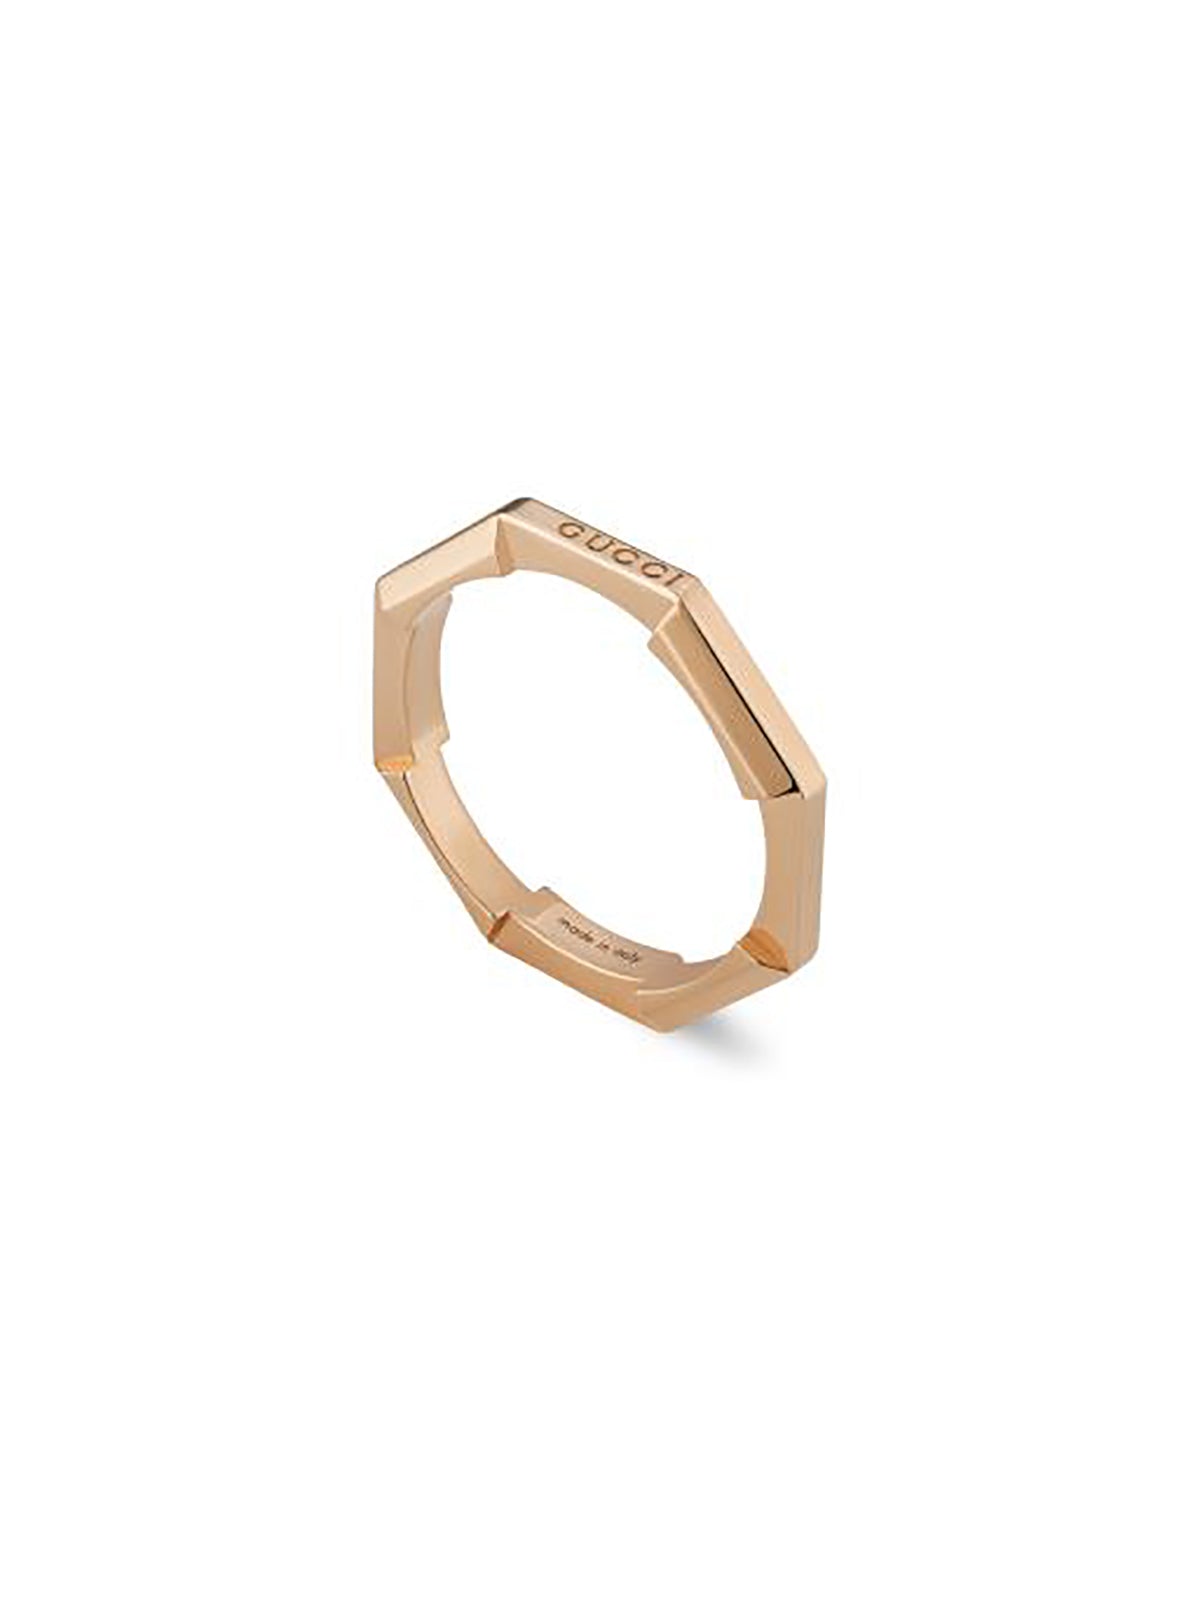 Gucci Link To Love Mirrored Ring in 18ct Yellow Gold - Size 13